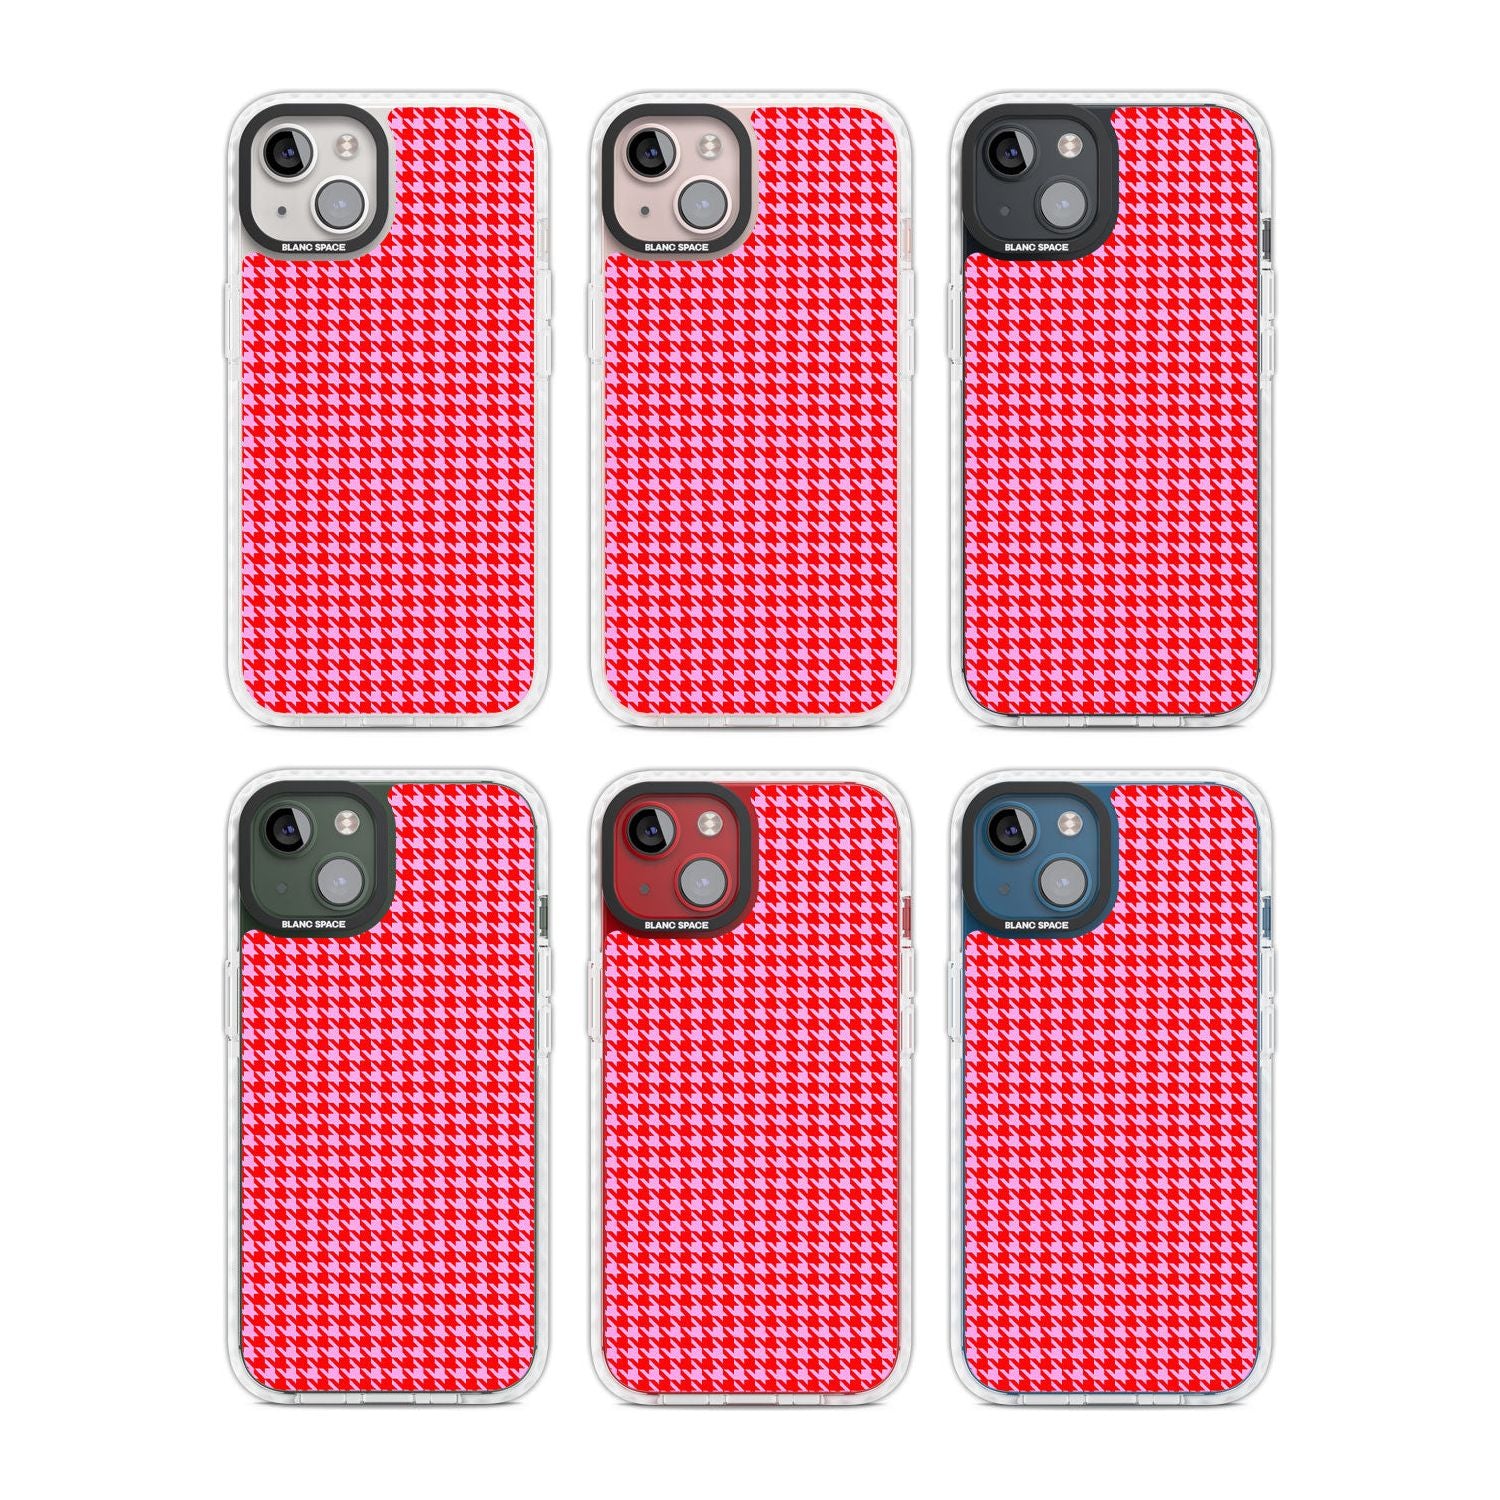 Neon Pink & Red Houndstooth Pattern Phone Case iPhone 15 Pro Max / Black Impact Case,iPhone 15 Plus / Black Impact Case,iPhone 15 Pro / Black Impact Case,iPhone 15 / Black Impact Case,iPhone 15 Pro Max / Impact Case,iPhone 15 Plus / Impact Case,iPhone 15 Pro / Impact Case,iPhone 15 / Impact Case,iPhone 15 Pro Max / Magsafe Black Impact Case,iPhone 15 Plus / Magsafe Black Impact Case,iPhone 15 Pro / Magsafe Black Impact Case,iPhone 15 / Magsafe Black Impact Case,iPhone 14 Pro Max / Black Impact Case,iPhone 1